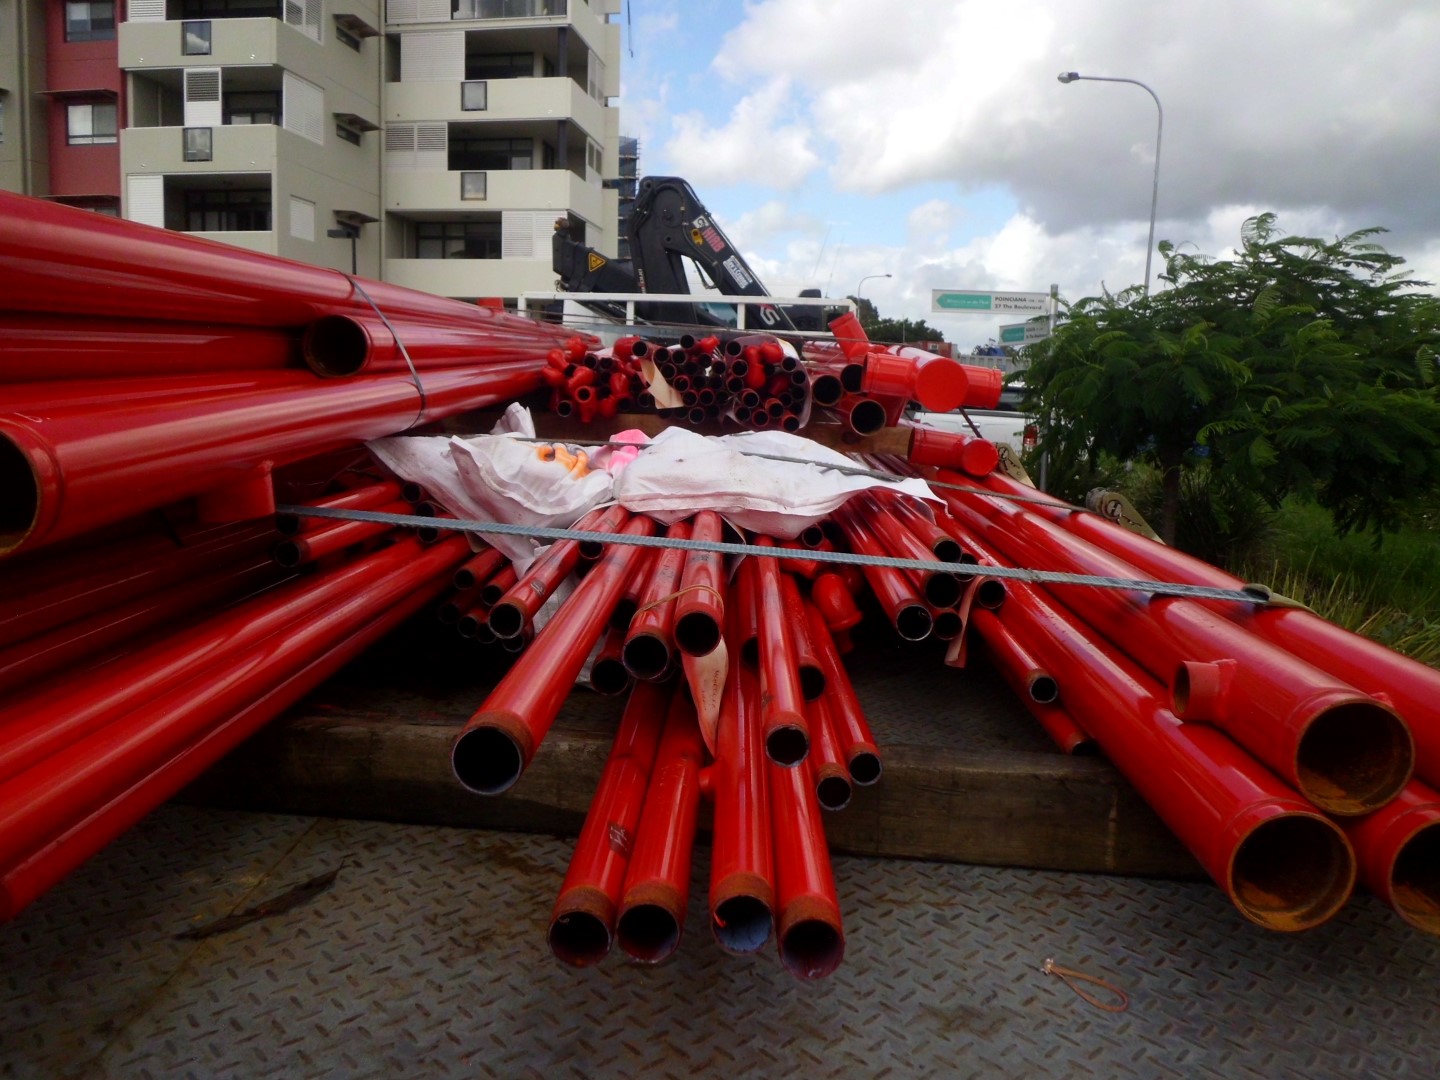 Red steel pipes